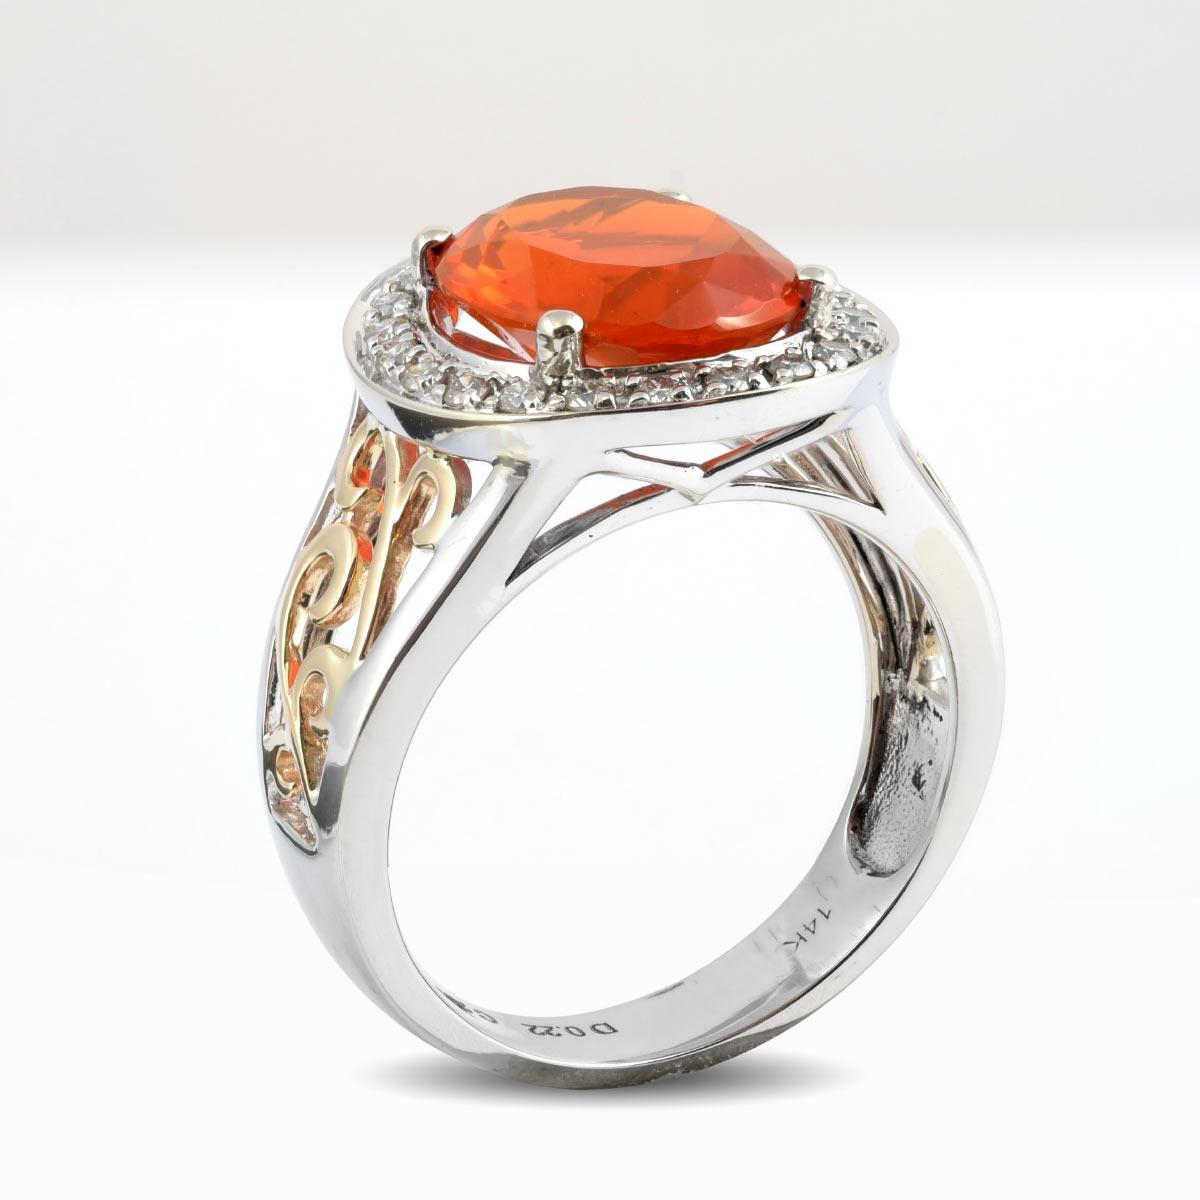 Fire Opal is the variety from the opal species that has a vibrant orange color like that of the setting sun. Beautiful in all its glory, this one that measures 2.74 carats, has been cut to reveal its beautiful clear interior free of any inclusions.